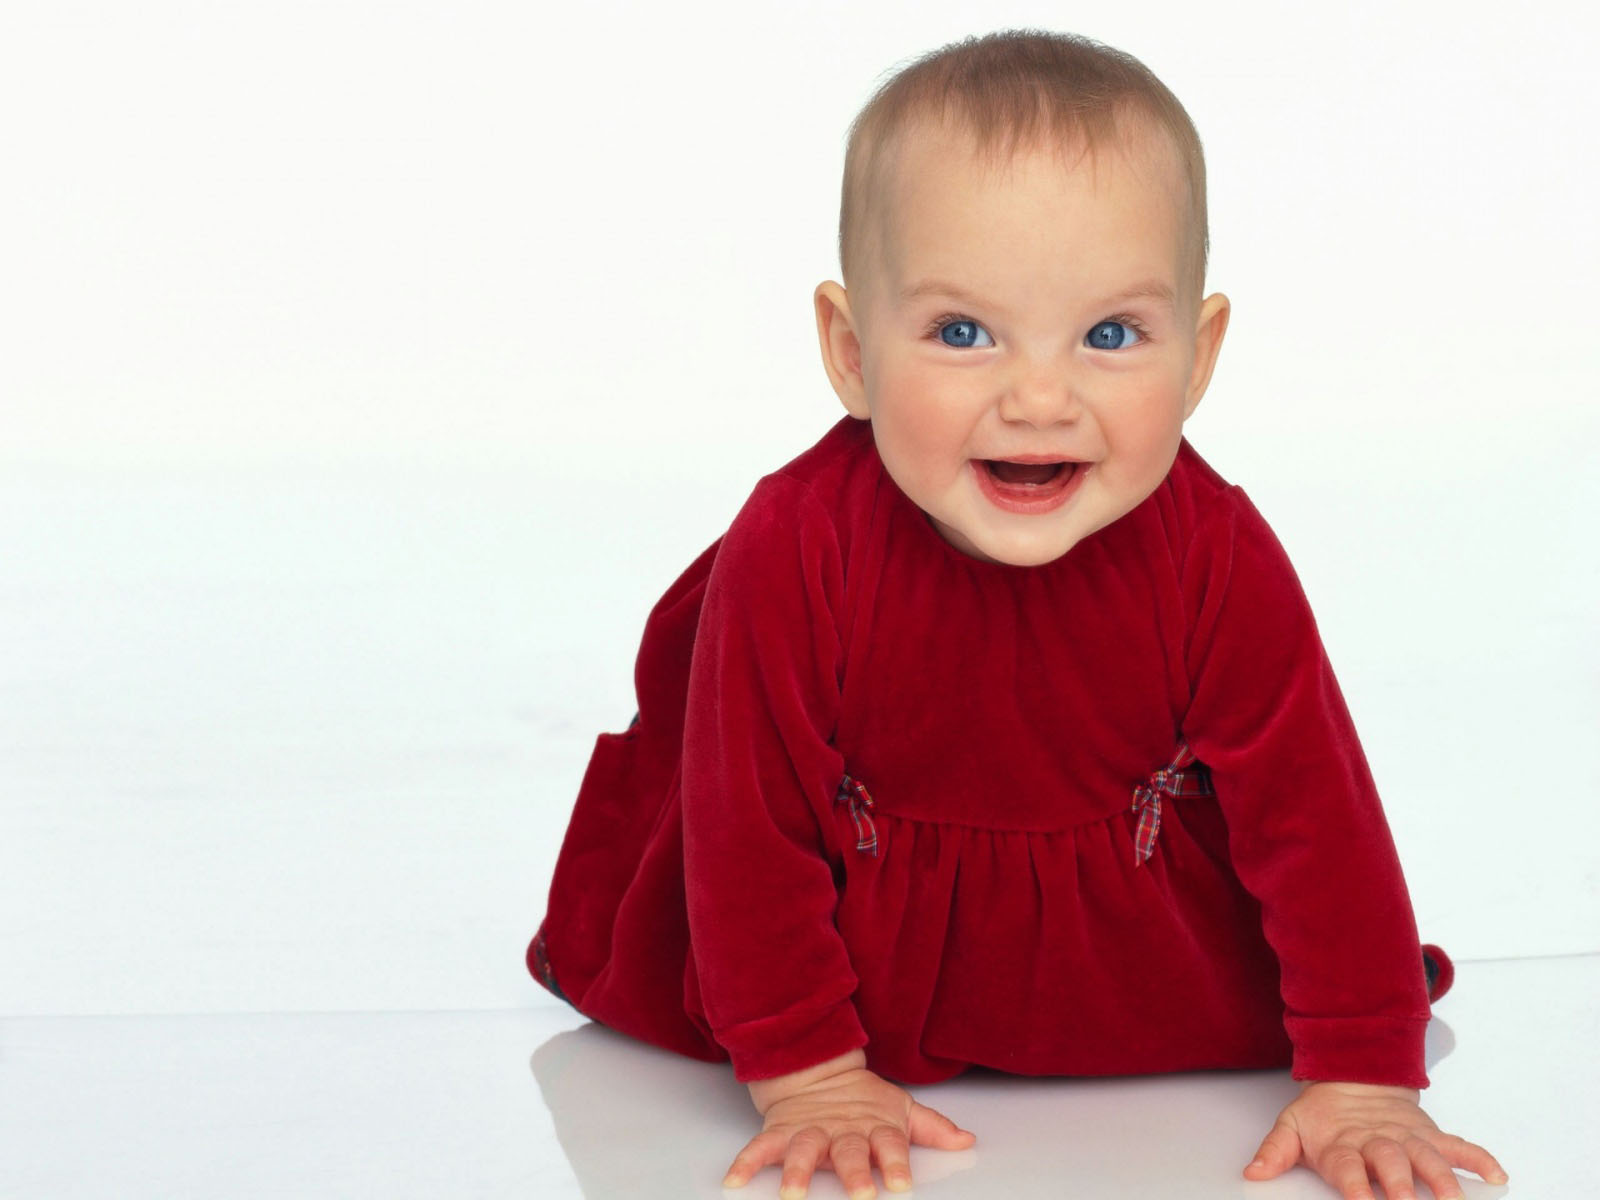 08 Laughing Baby HD Wallpapers for Desktop – Daily Backgrounds in HD